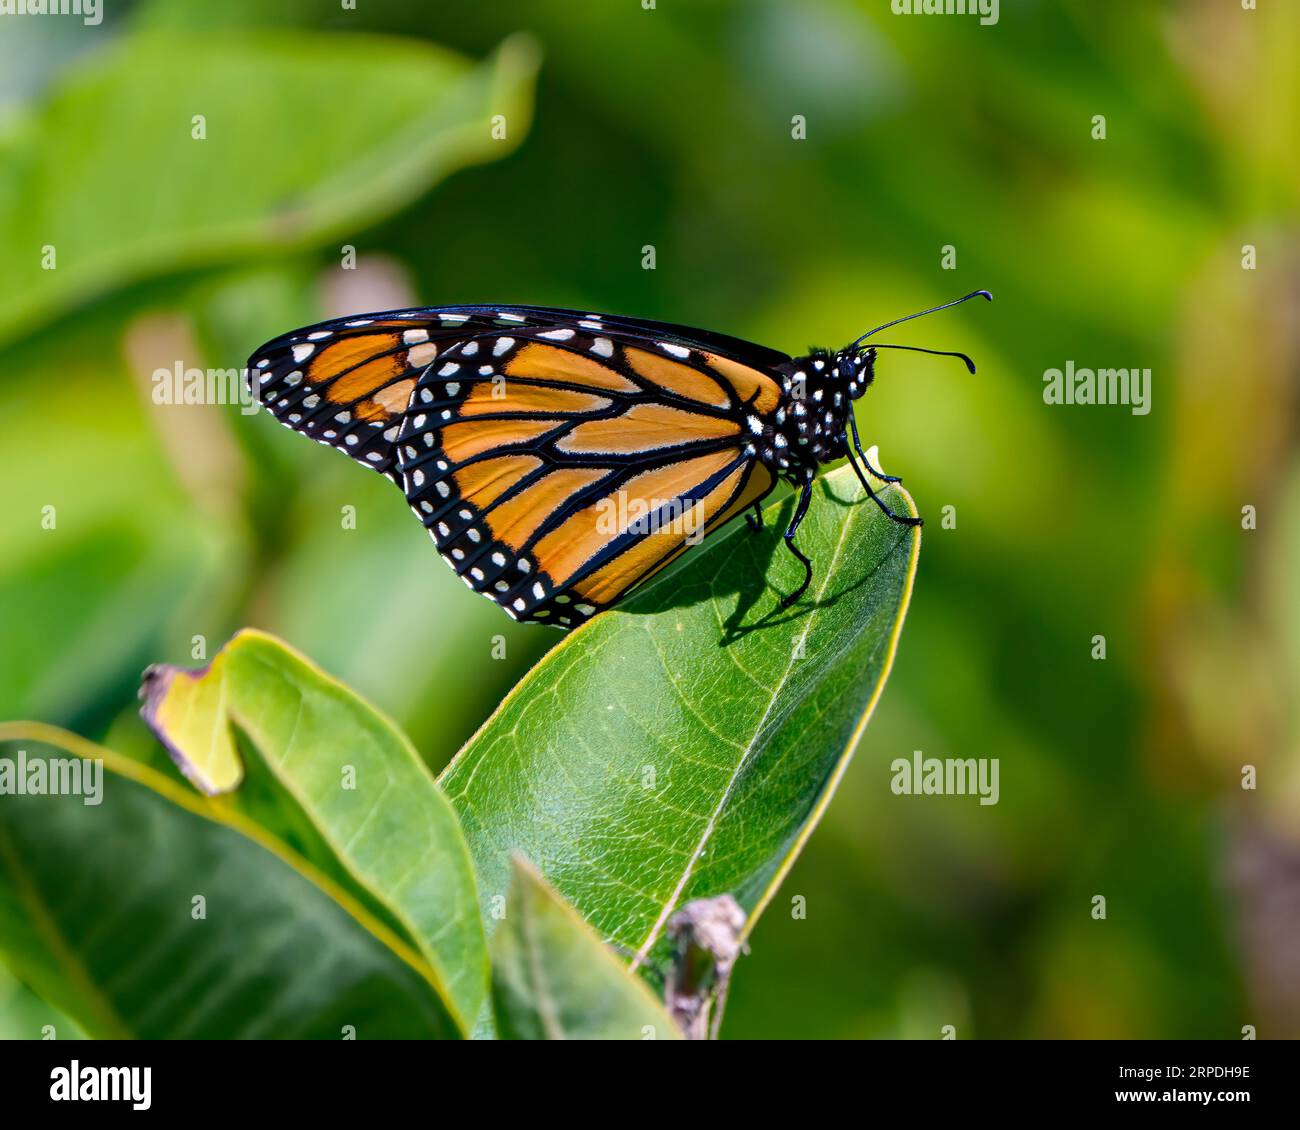 Monarch Butterfly close-up side view perched on a plant with a blur green background in its environment and habitat surrounding. Stock Photo